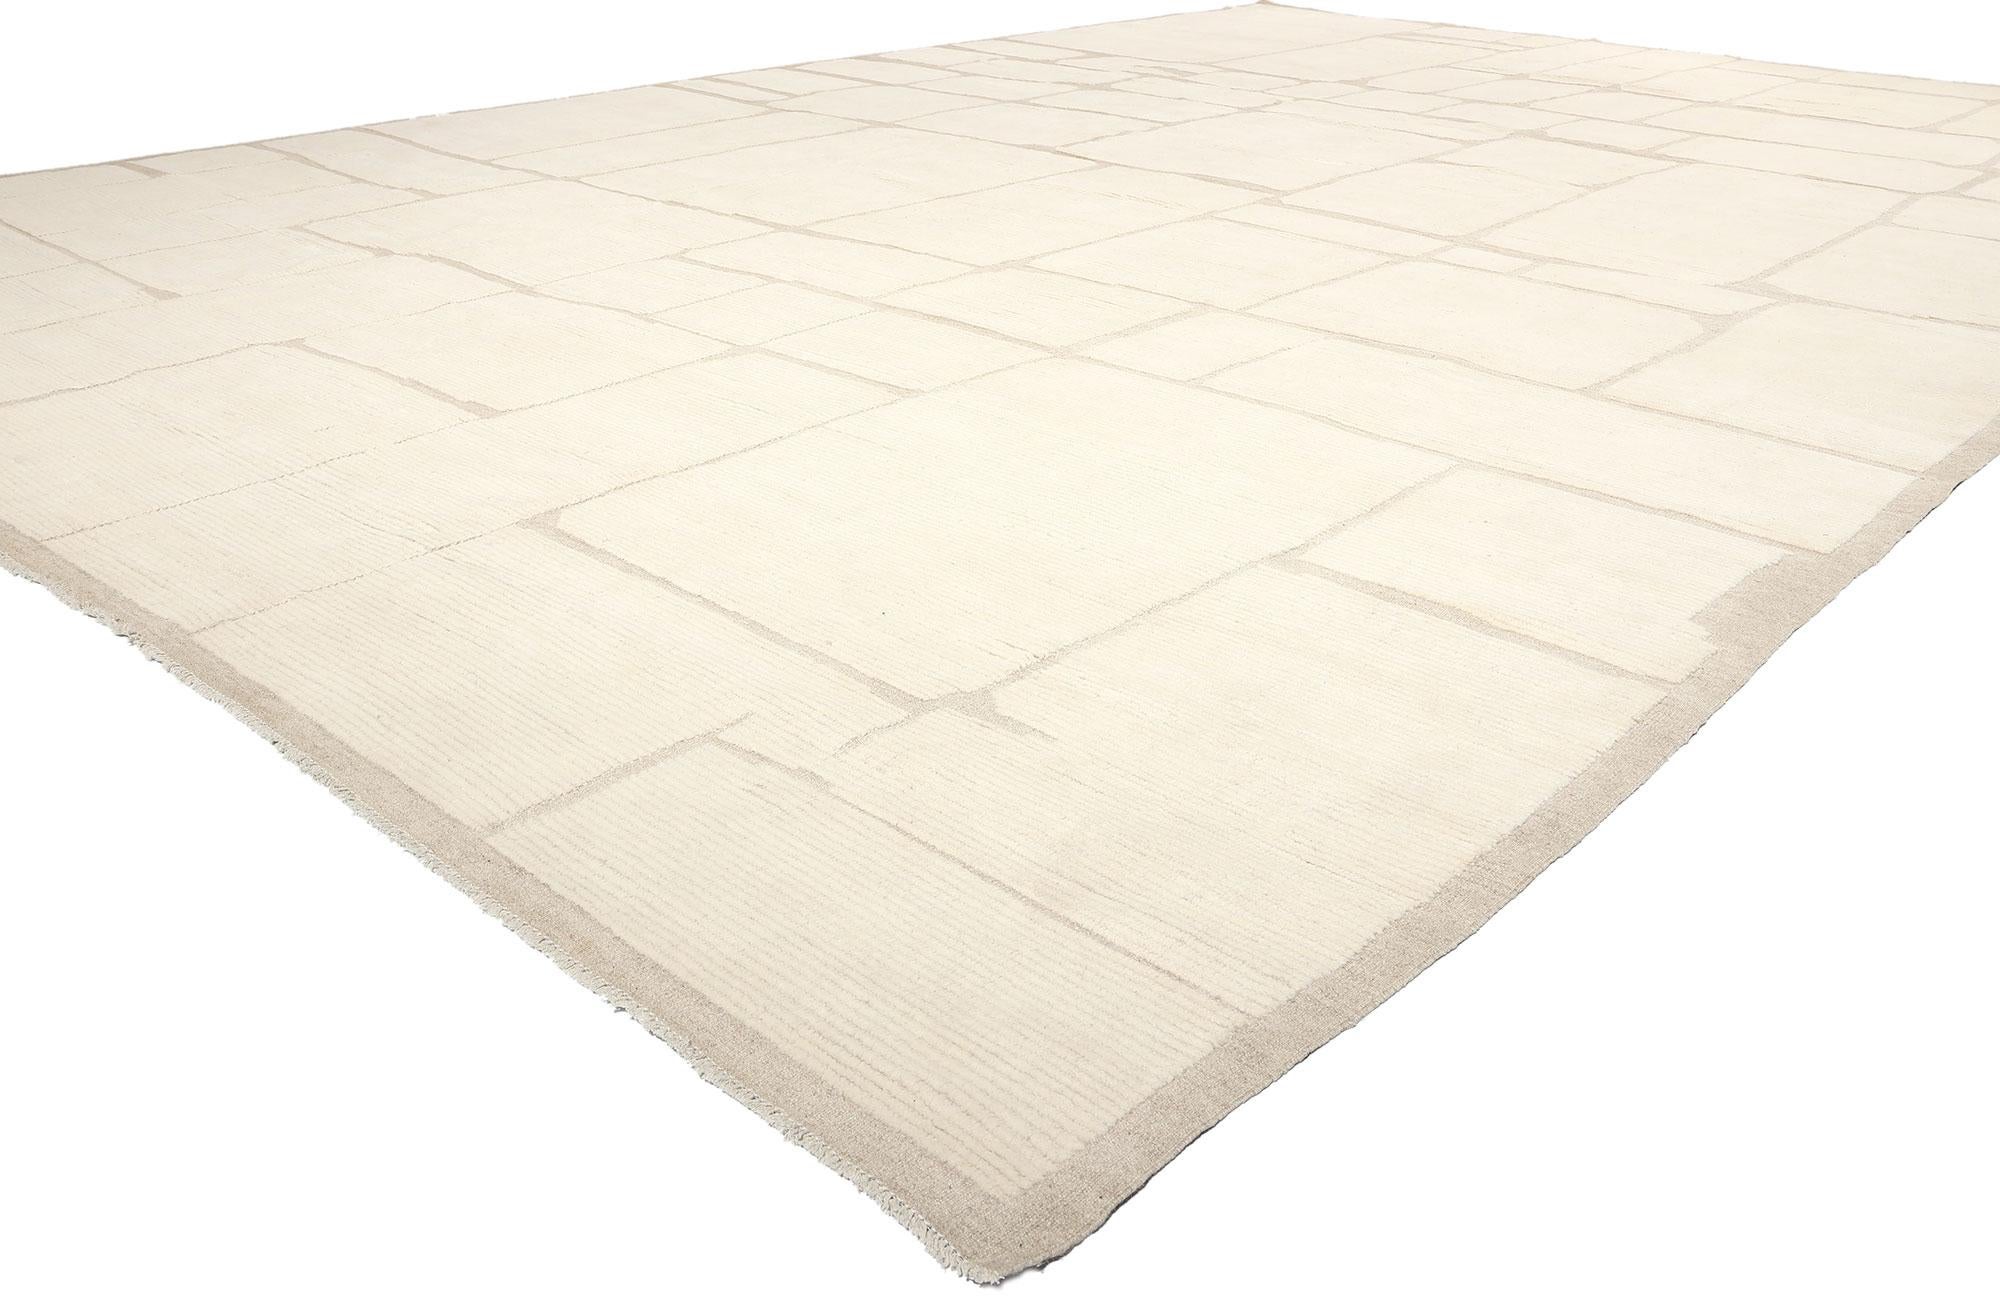 81086 Oversized Organic Modern Moroccan High-Low Rug, 13'07 x 20'02. Behold our magnificent oversized hand-knotted wool masterpiece, an enchanting blend of Biophilic Japandi and Wabi-Sabi design philosophies, meticulously crafted to infuse your home